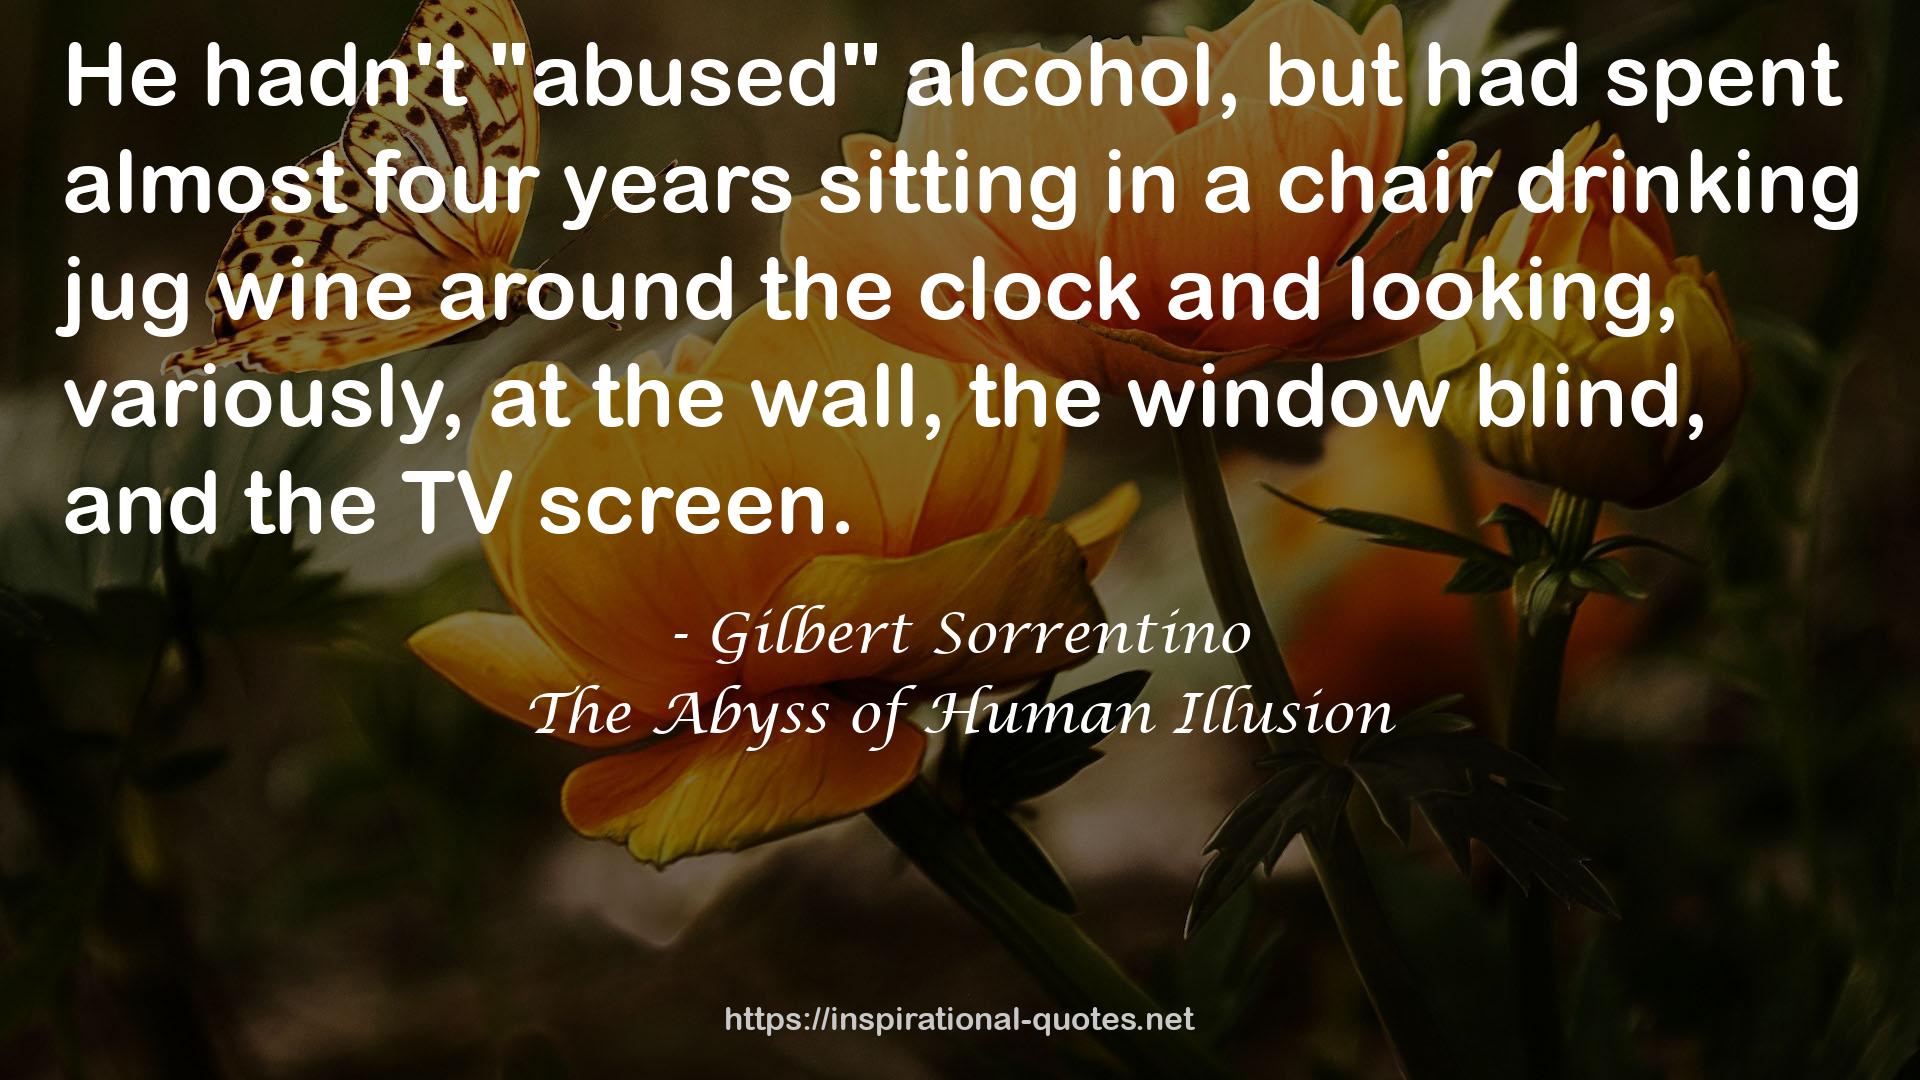 The Abyss of Human Illusion QUOTES